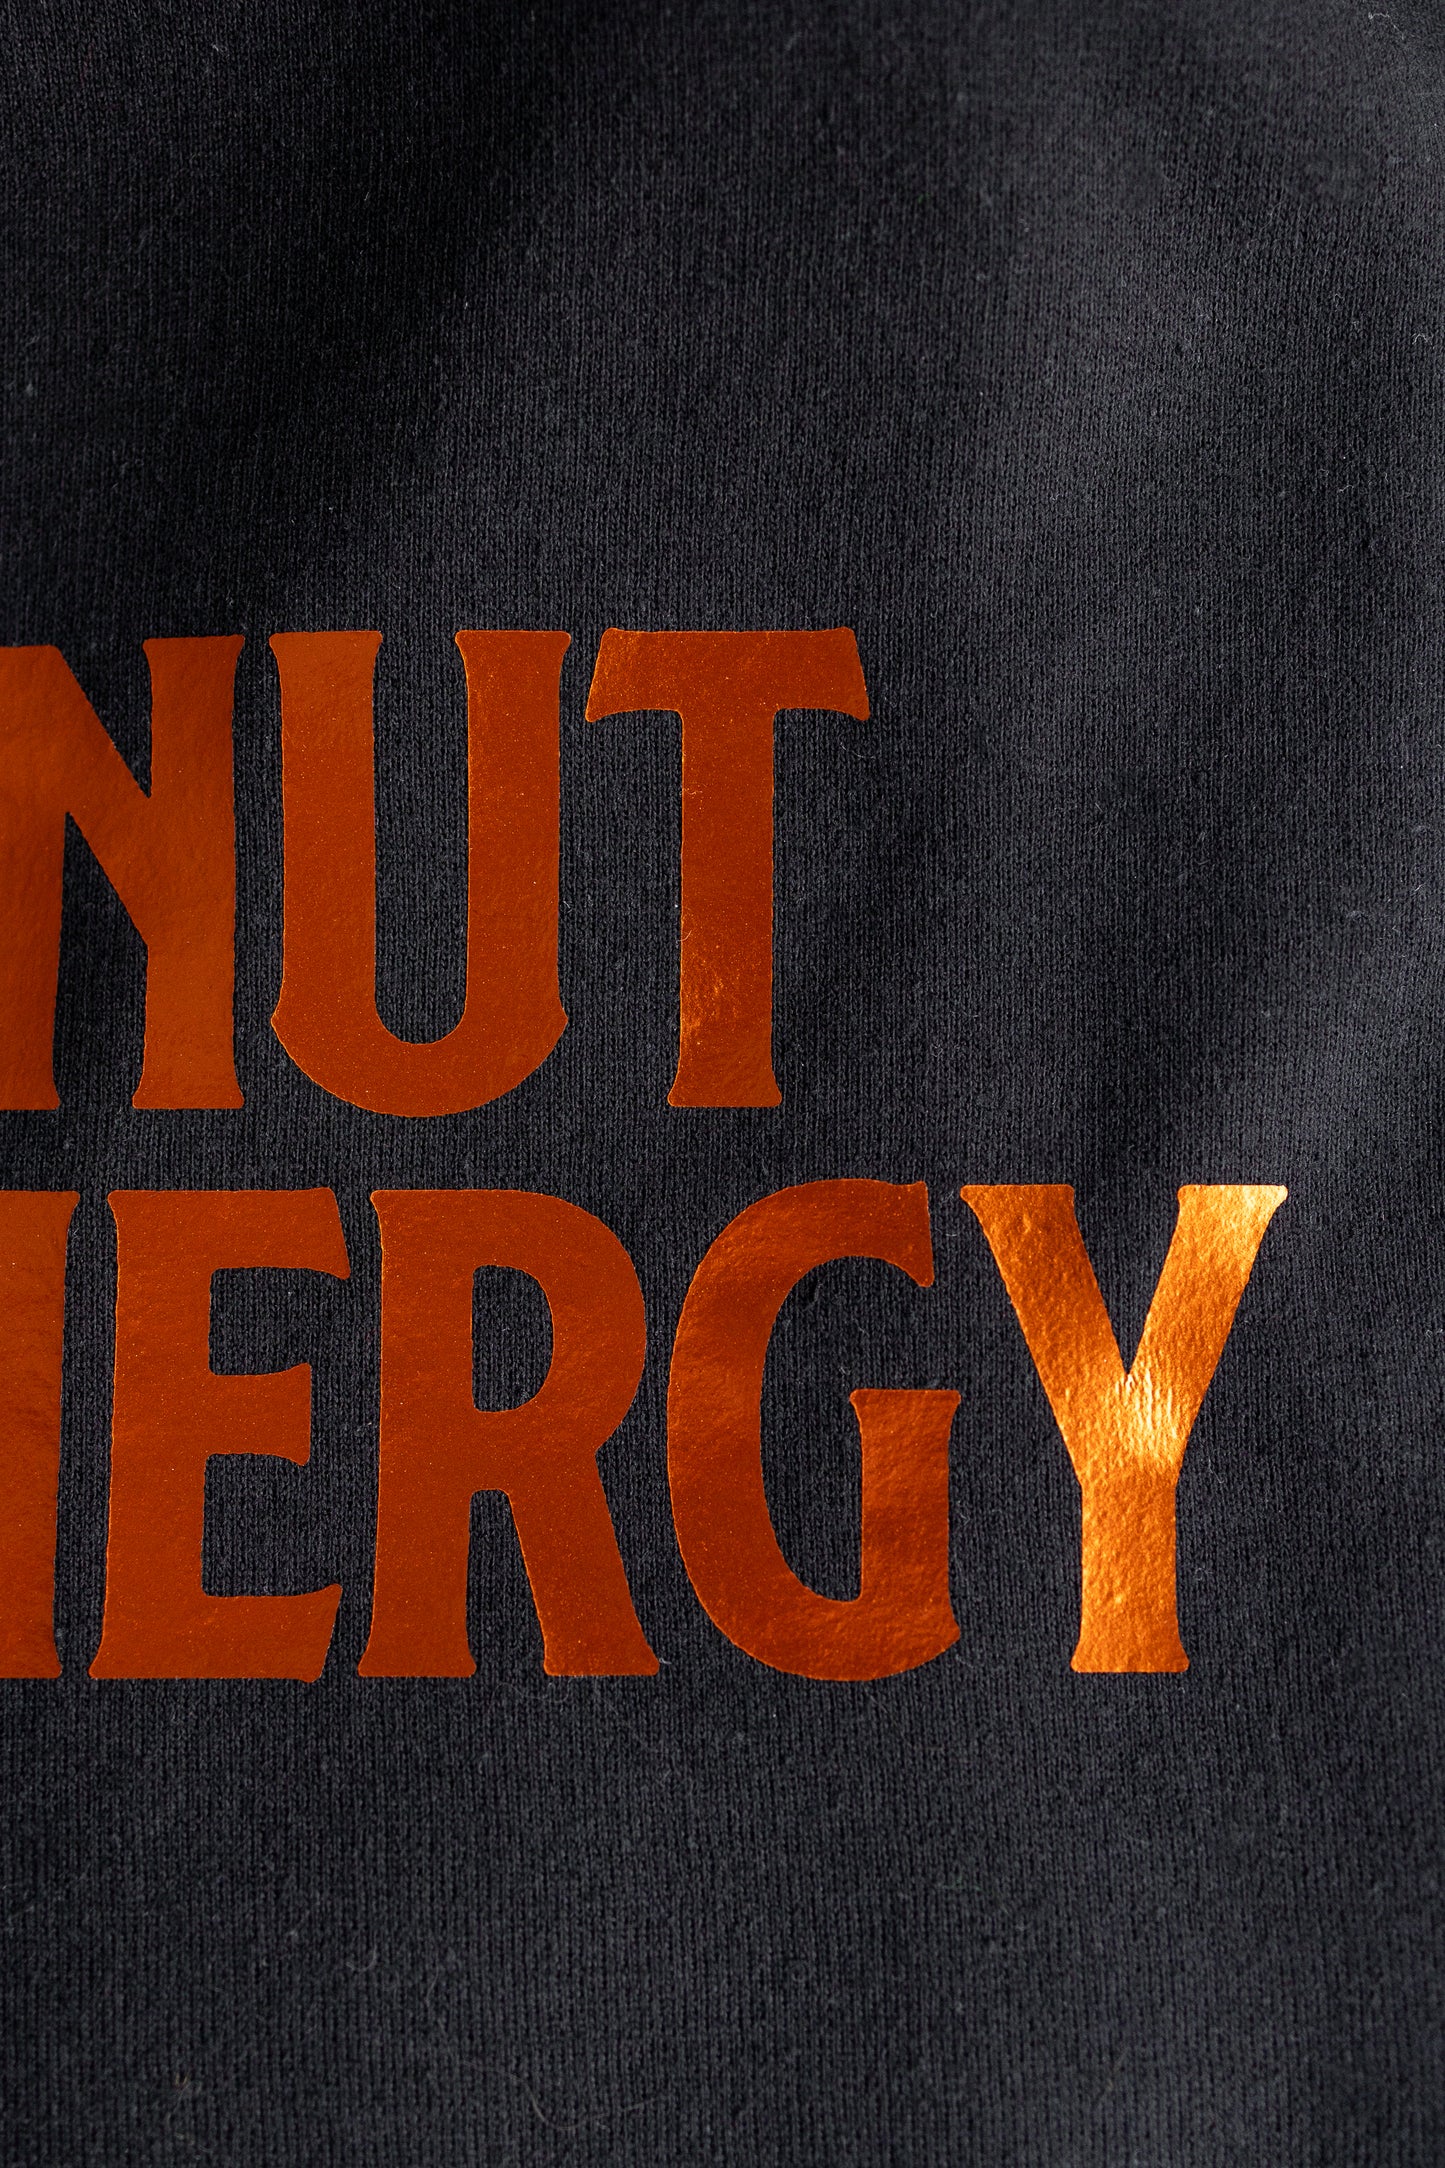 Chestnut Mare Energy Crewneck *MADE TO ORDER*